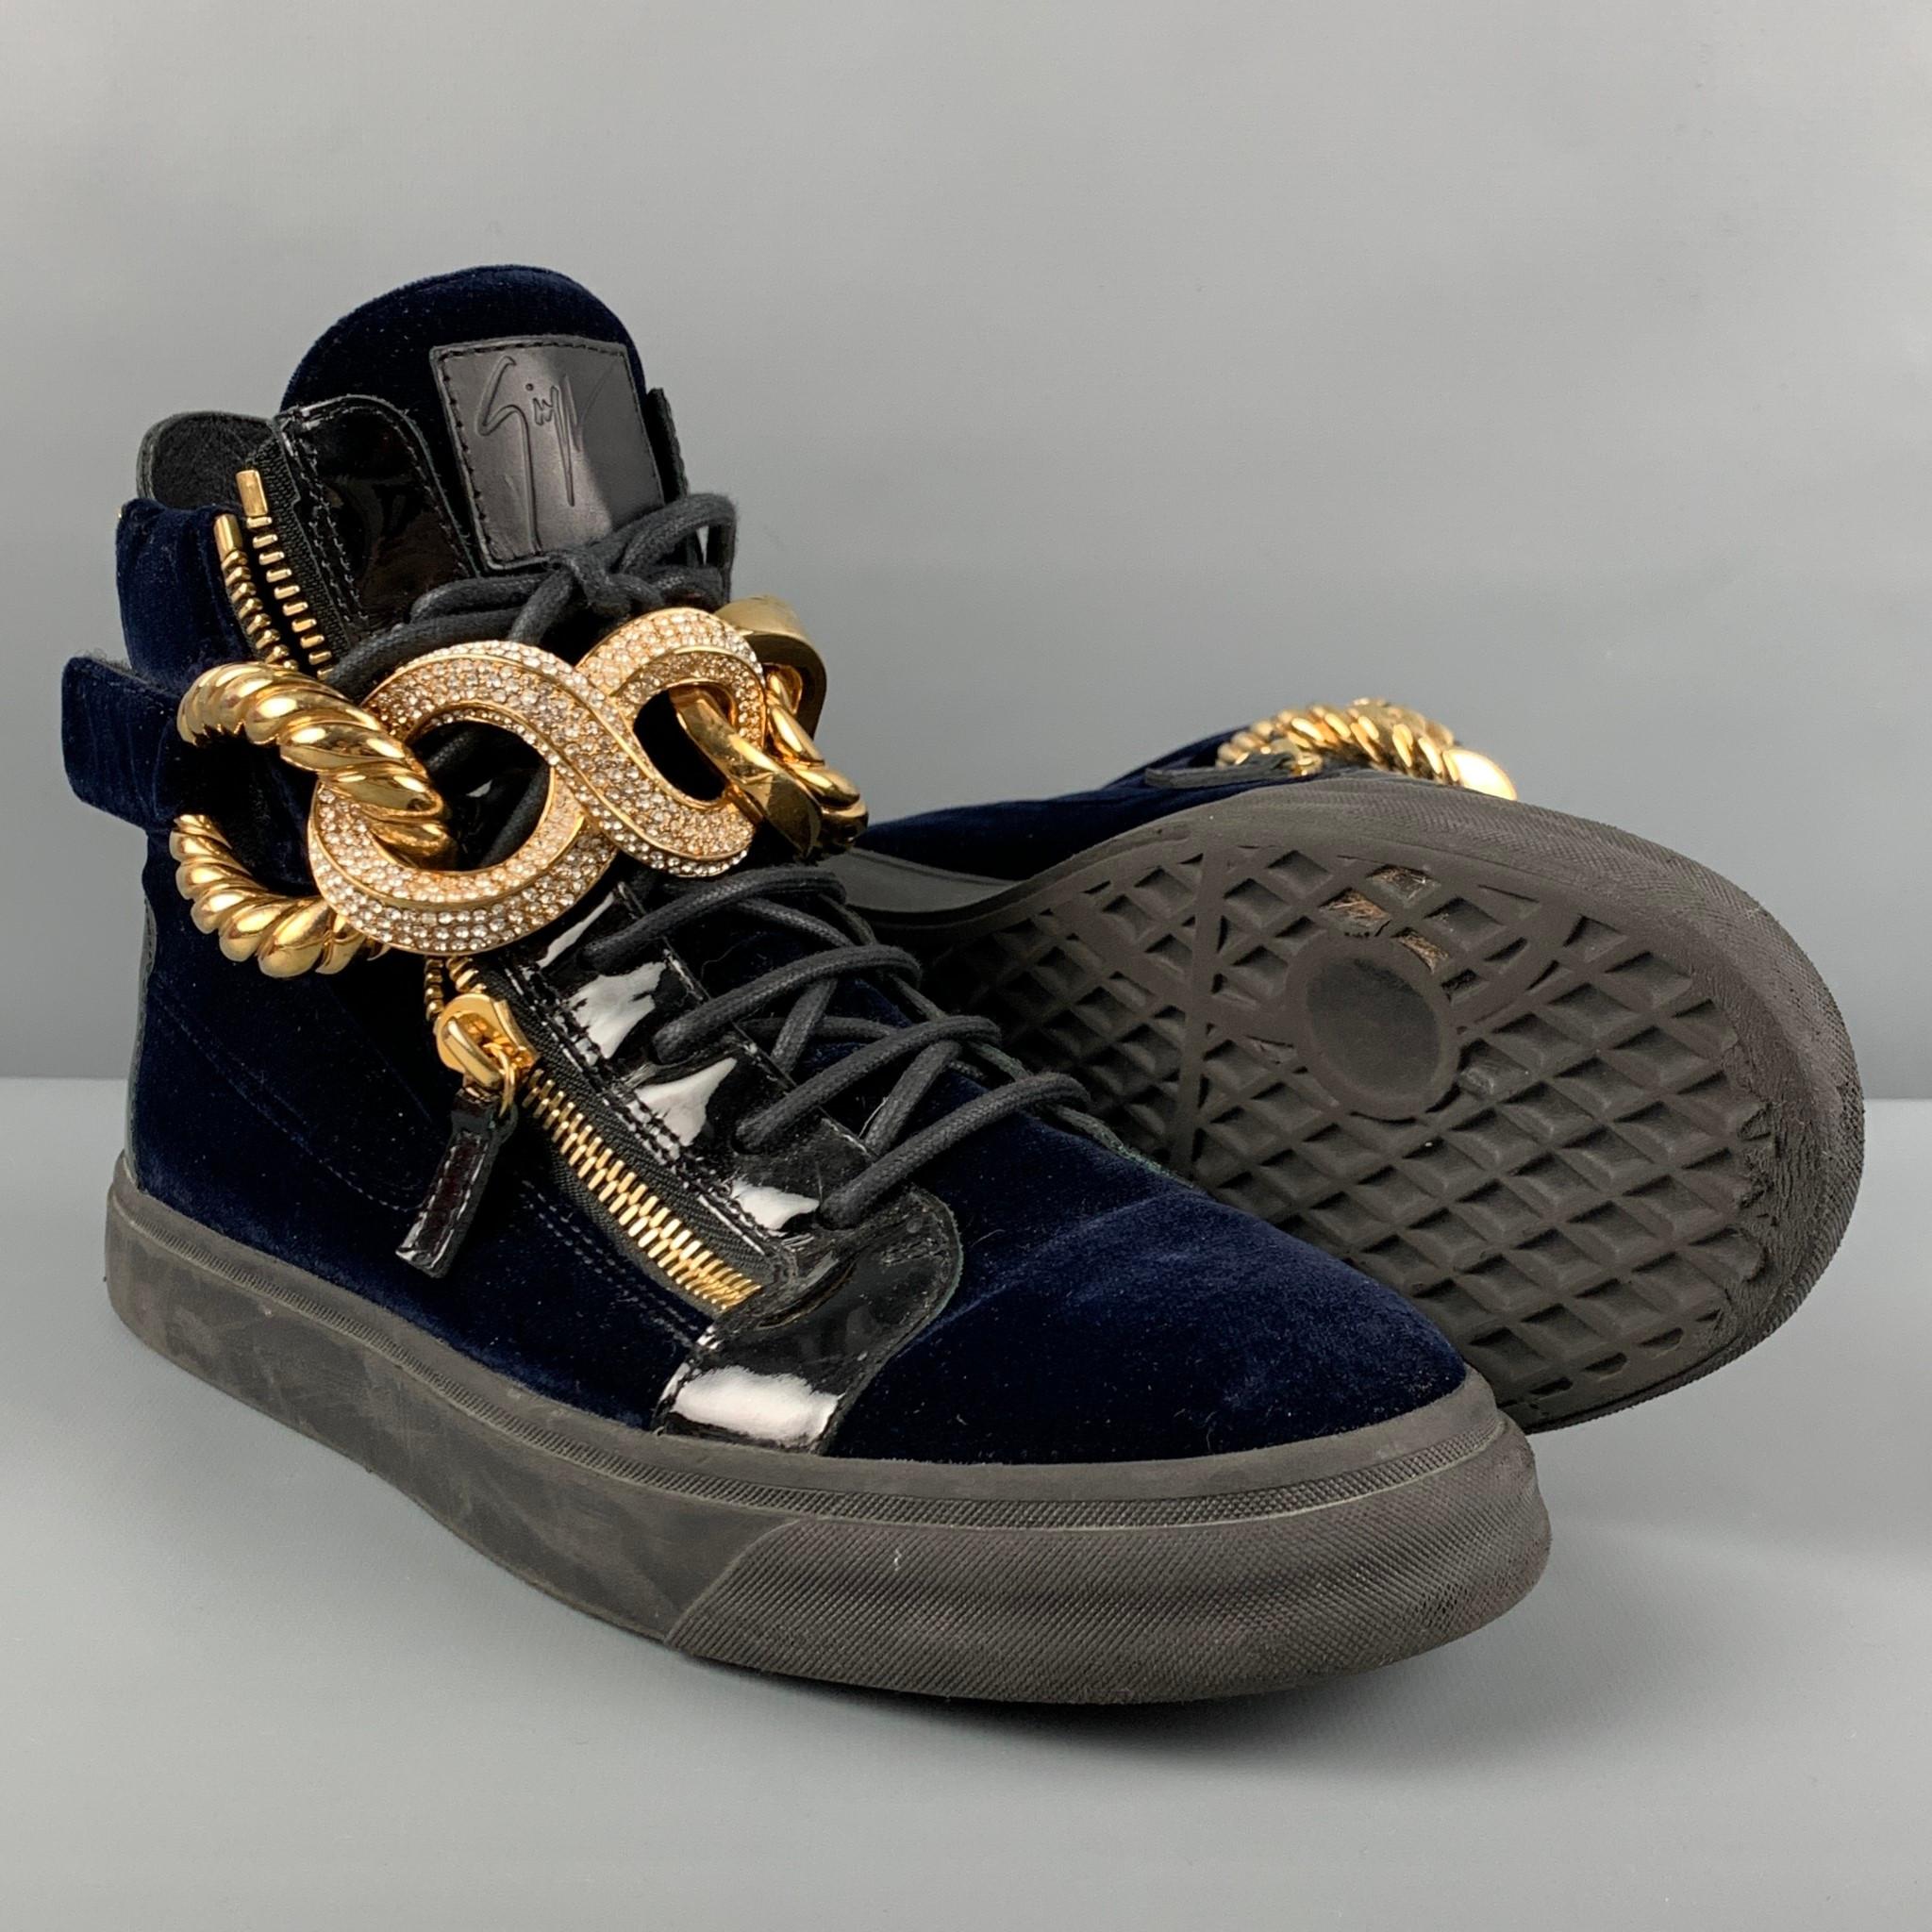 GIUSEPPE ZANOTTI sneakers comes in a navy velvet featuring a high top style, patent leather trim, oversized gold tone front chain, back zipper detail, rubber sole, and a lace up closure. Made in Italy. 

Very Good Pre-Owned Condition.
Marked: